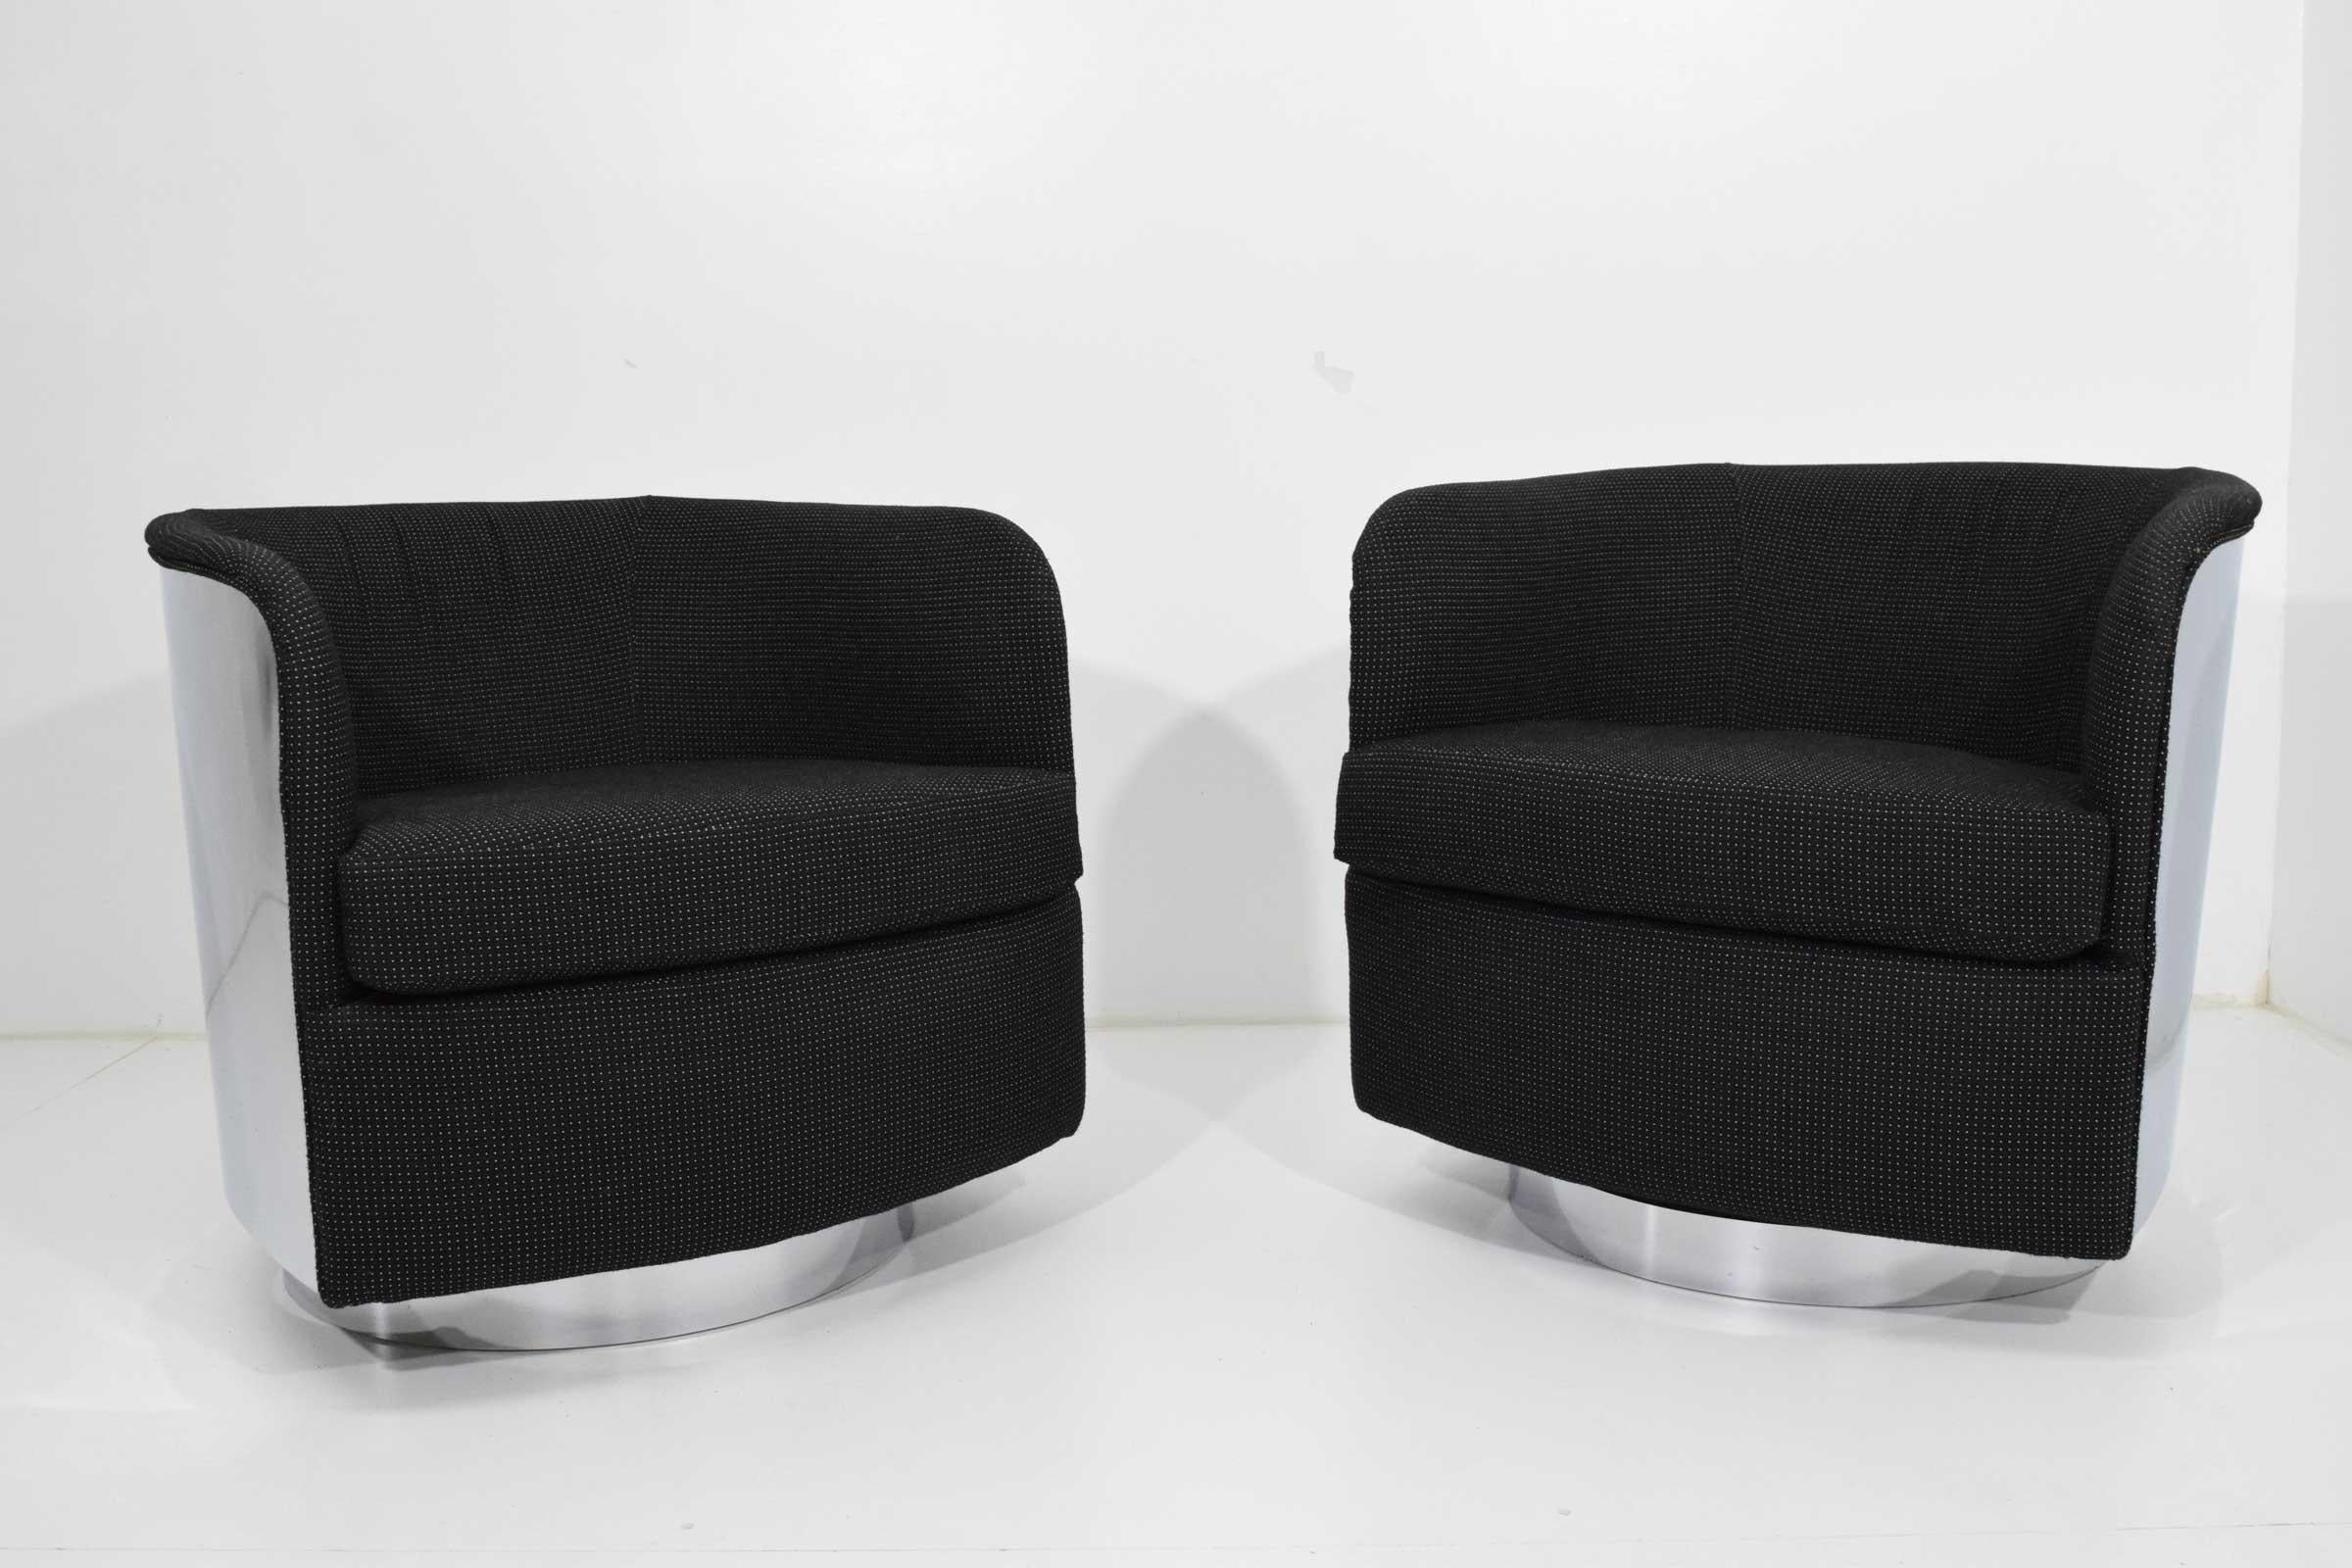 North American Chrome Case Swivel Chairs by Milo Baughman in Black Upholstery